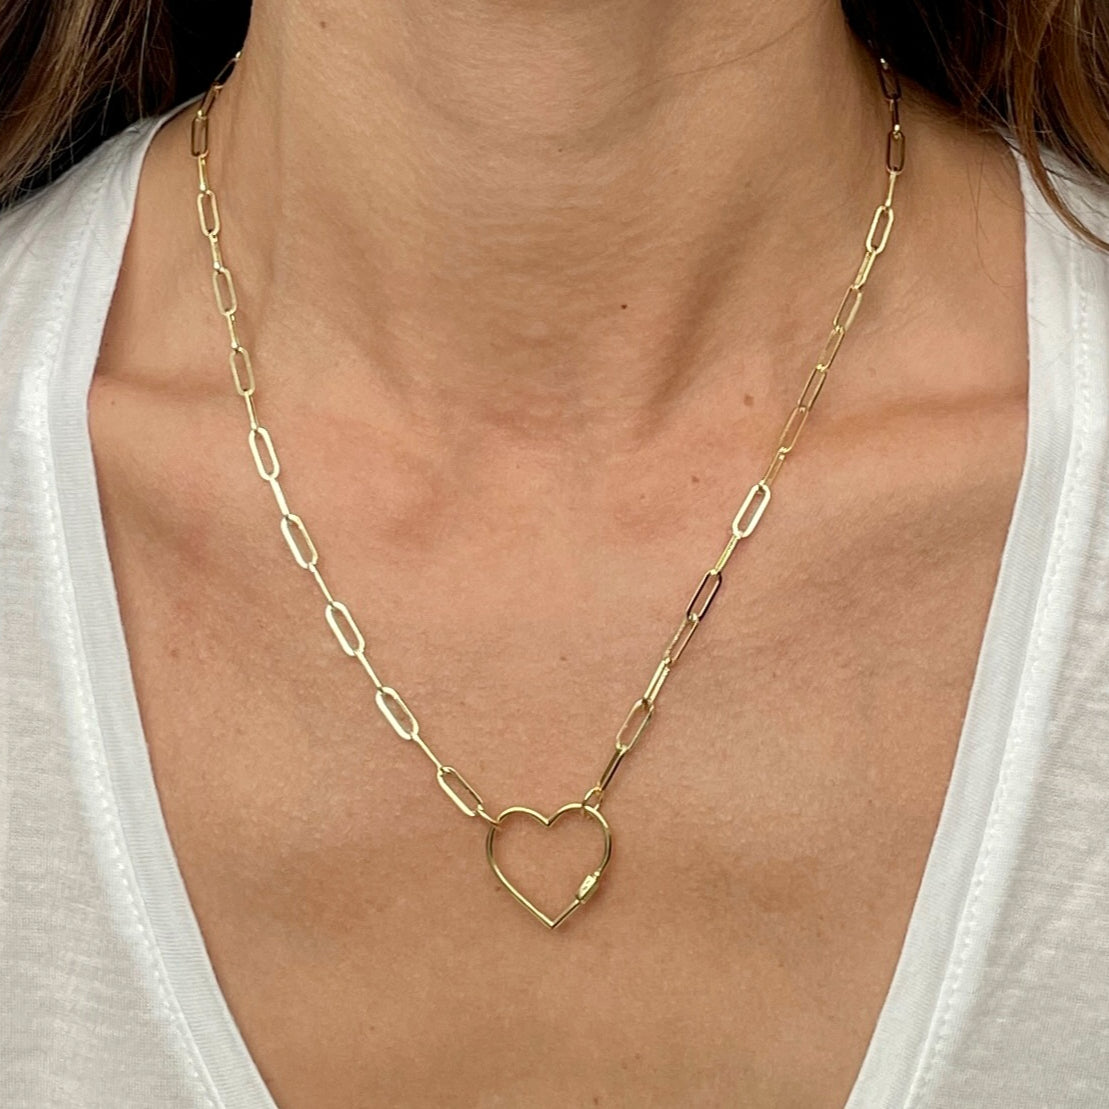 14k gold heart carabiner paperclip necklace